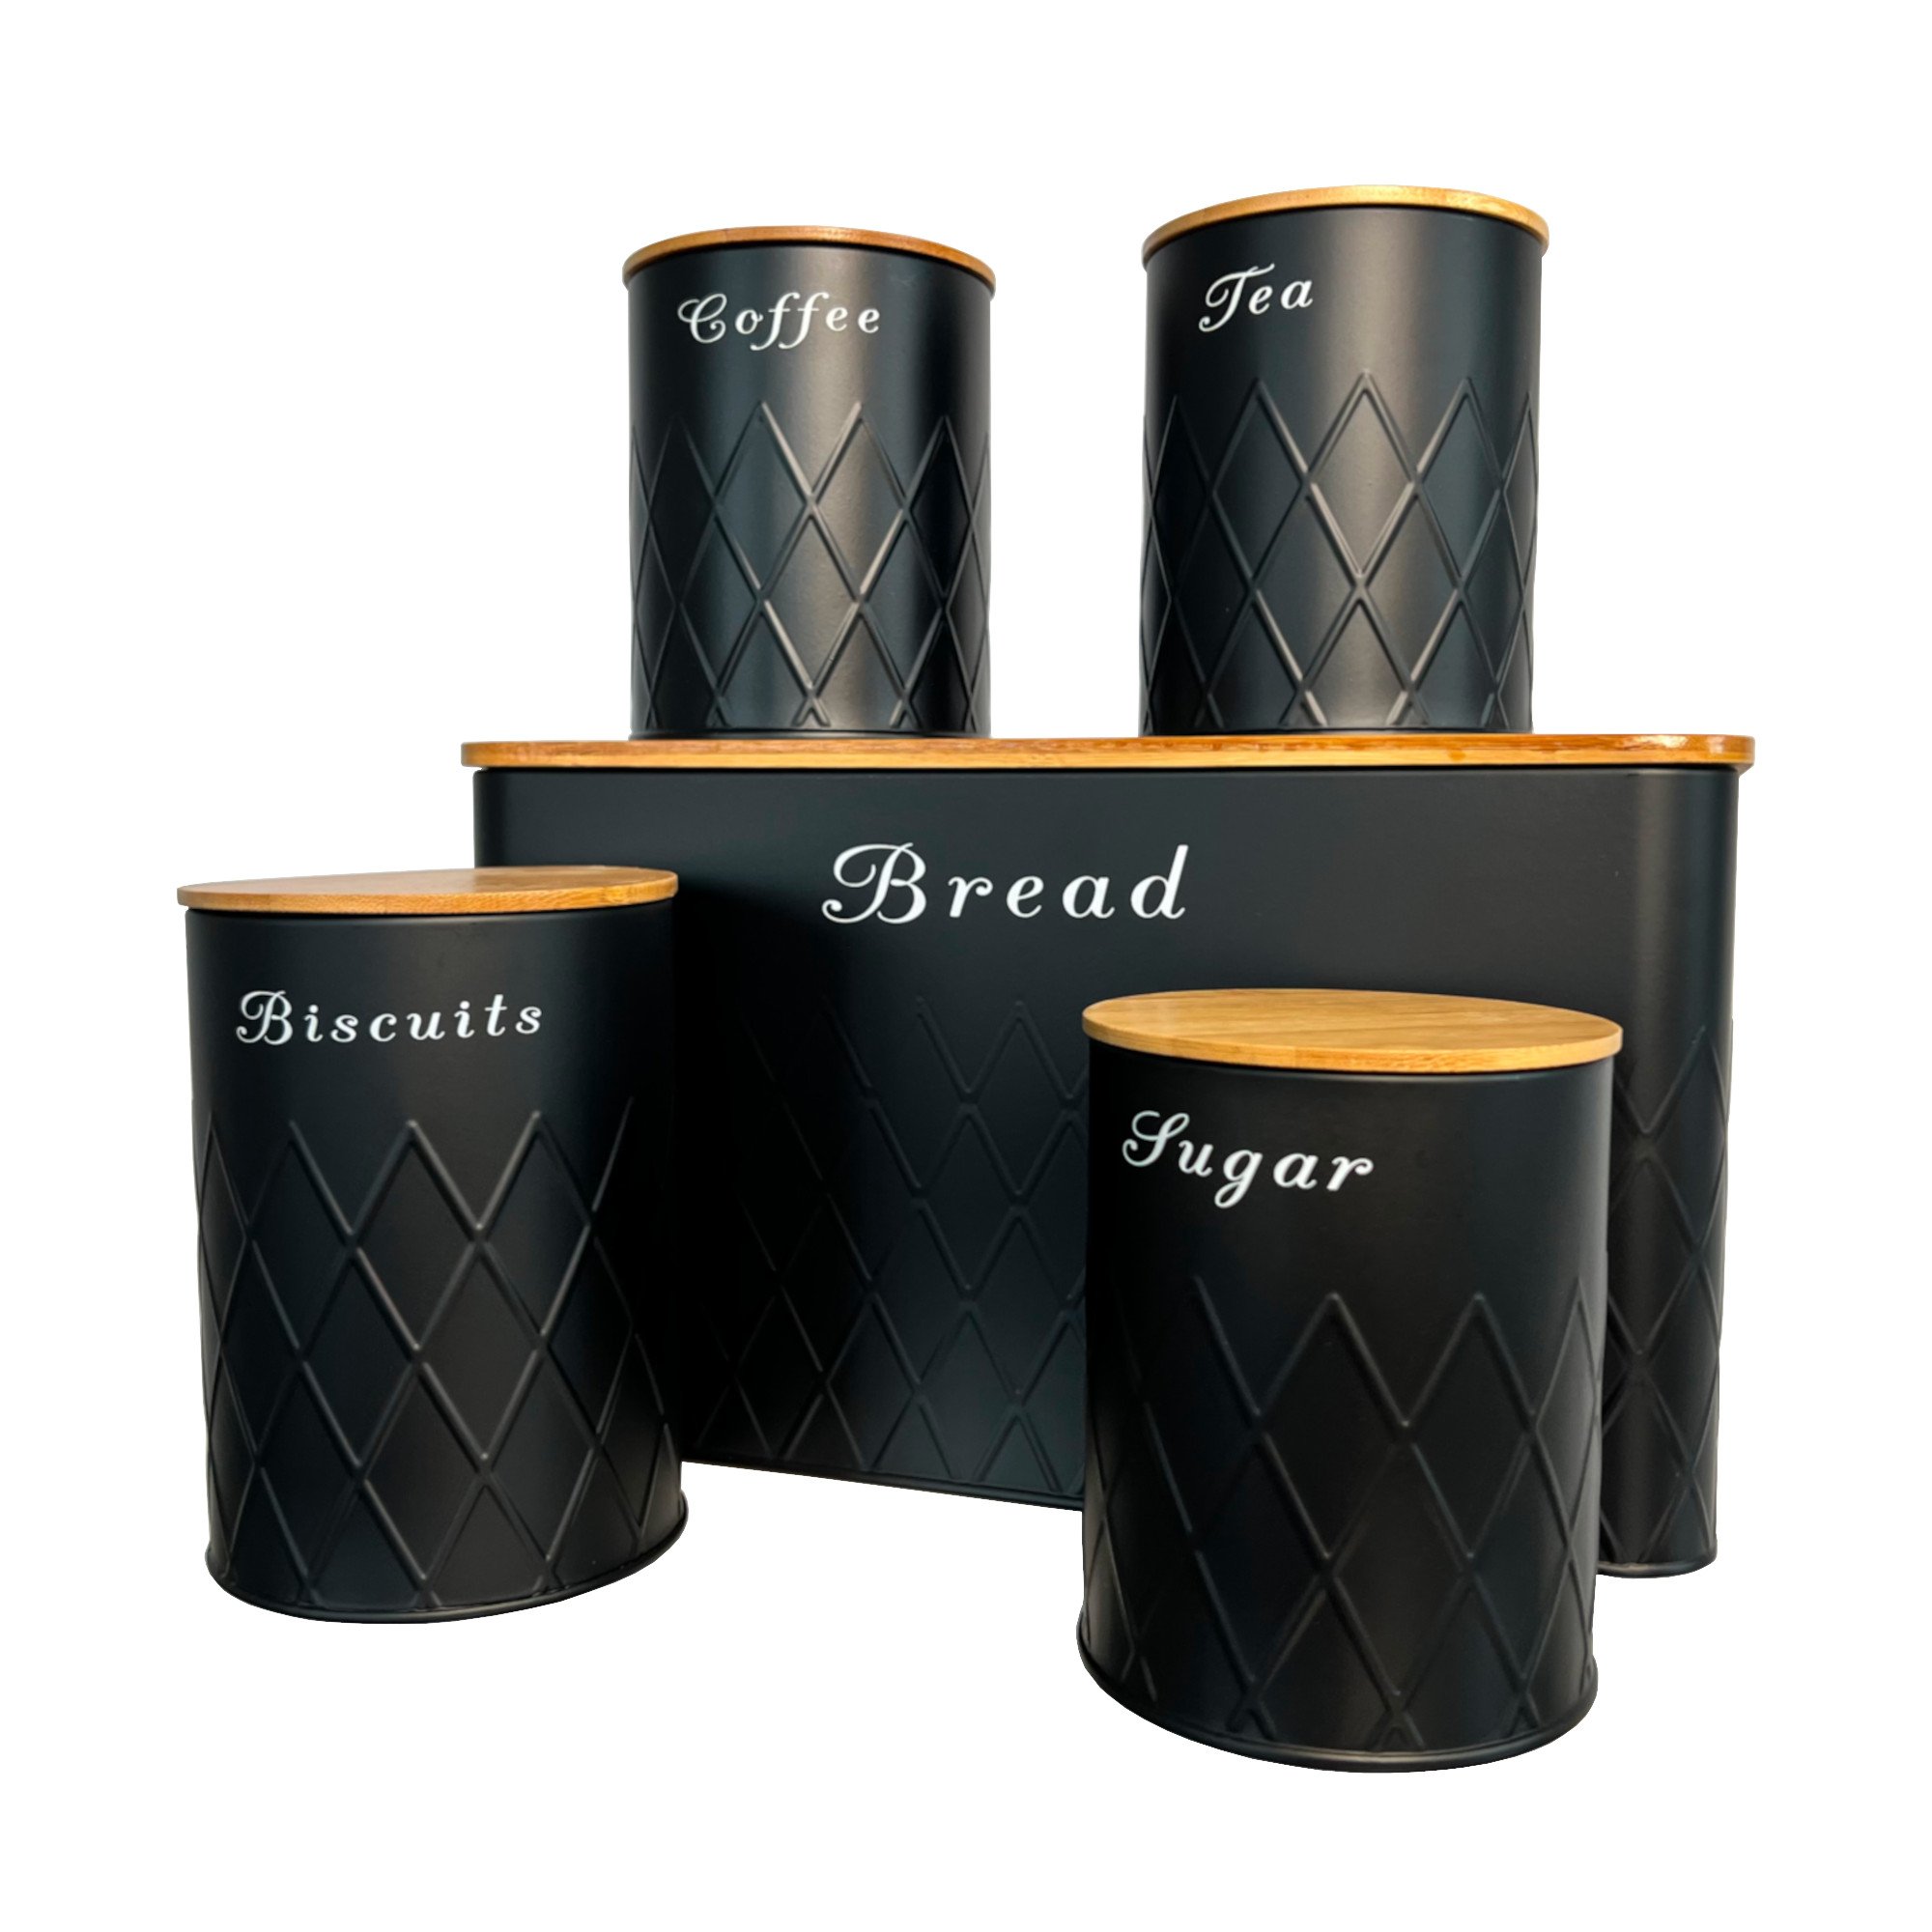 5pc Black Bamboo Lid Kitchen Canister Set Bread Biscuits Tea Sugar Coffee - Click Image to Close